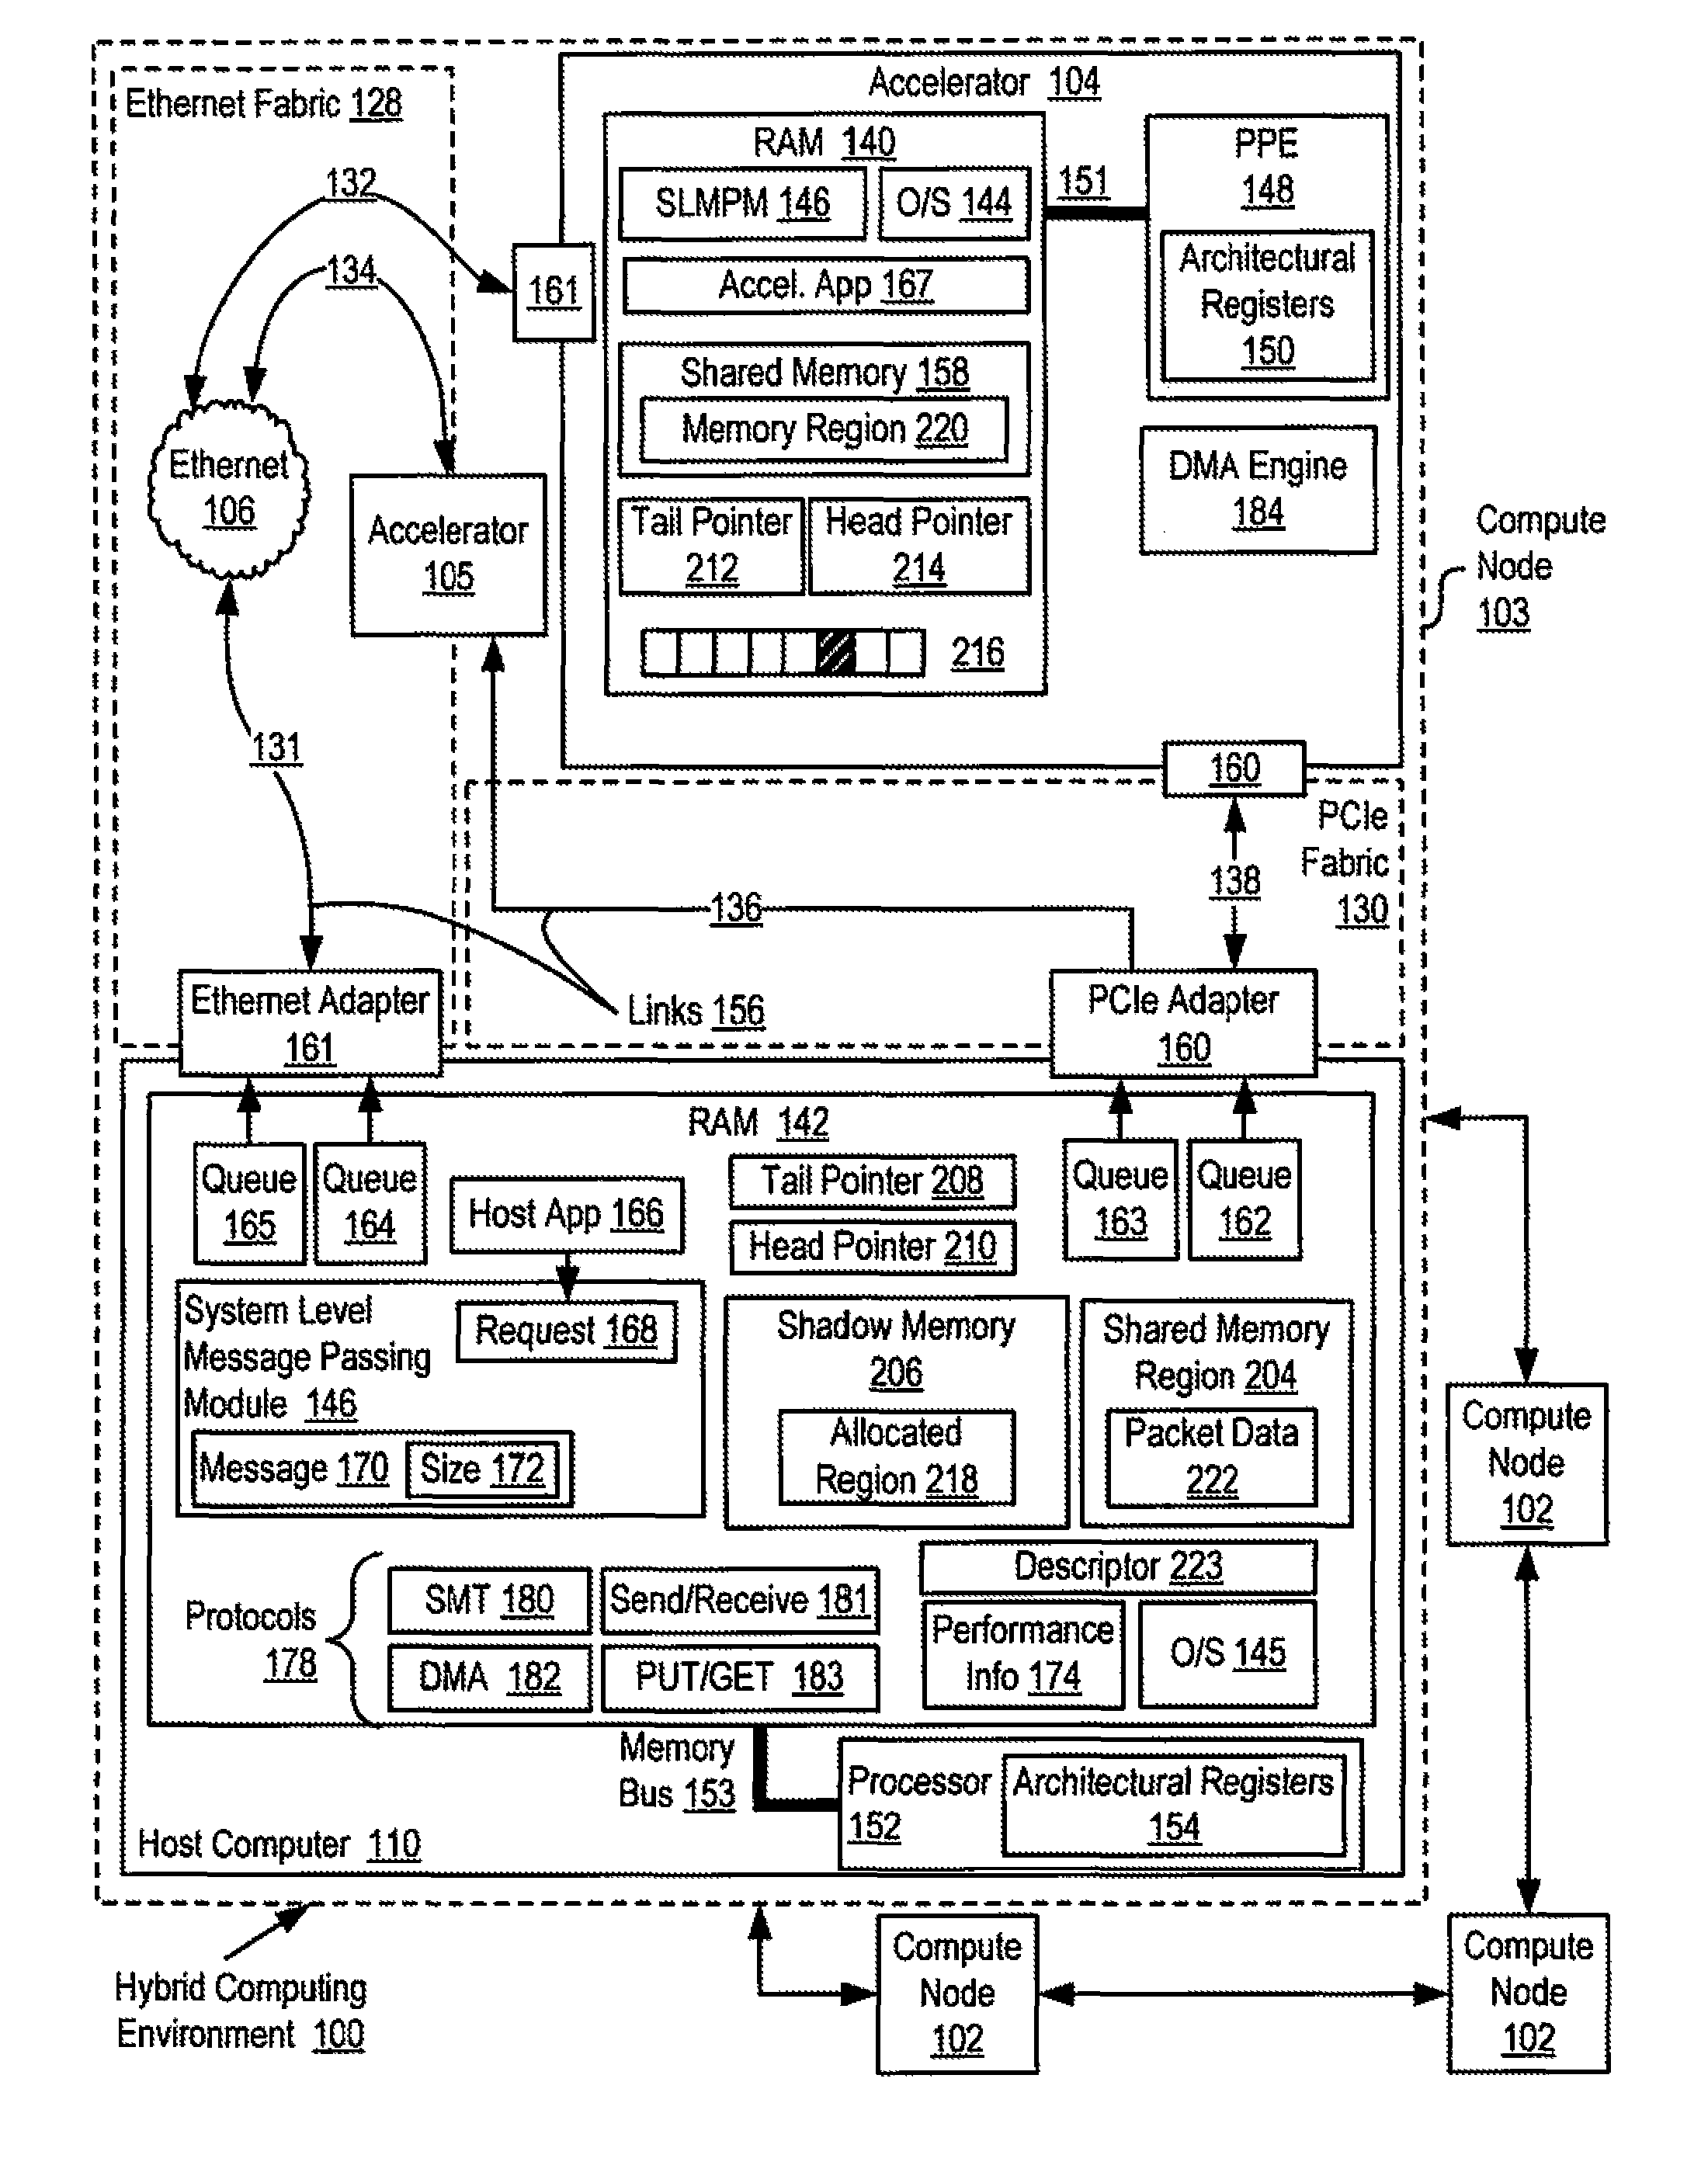 Reducing remote reads of memory in a hybrid computing environment